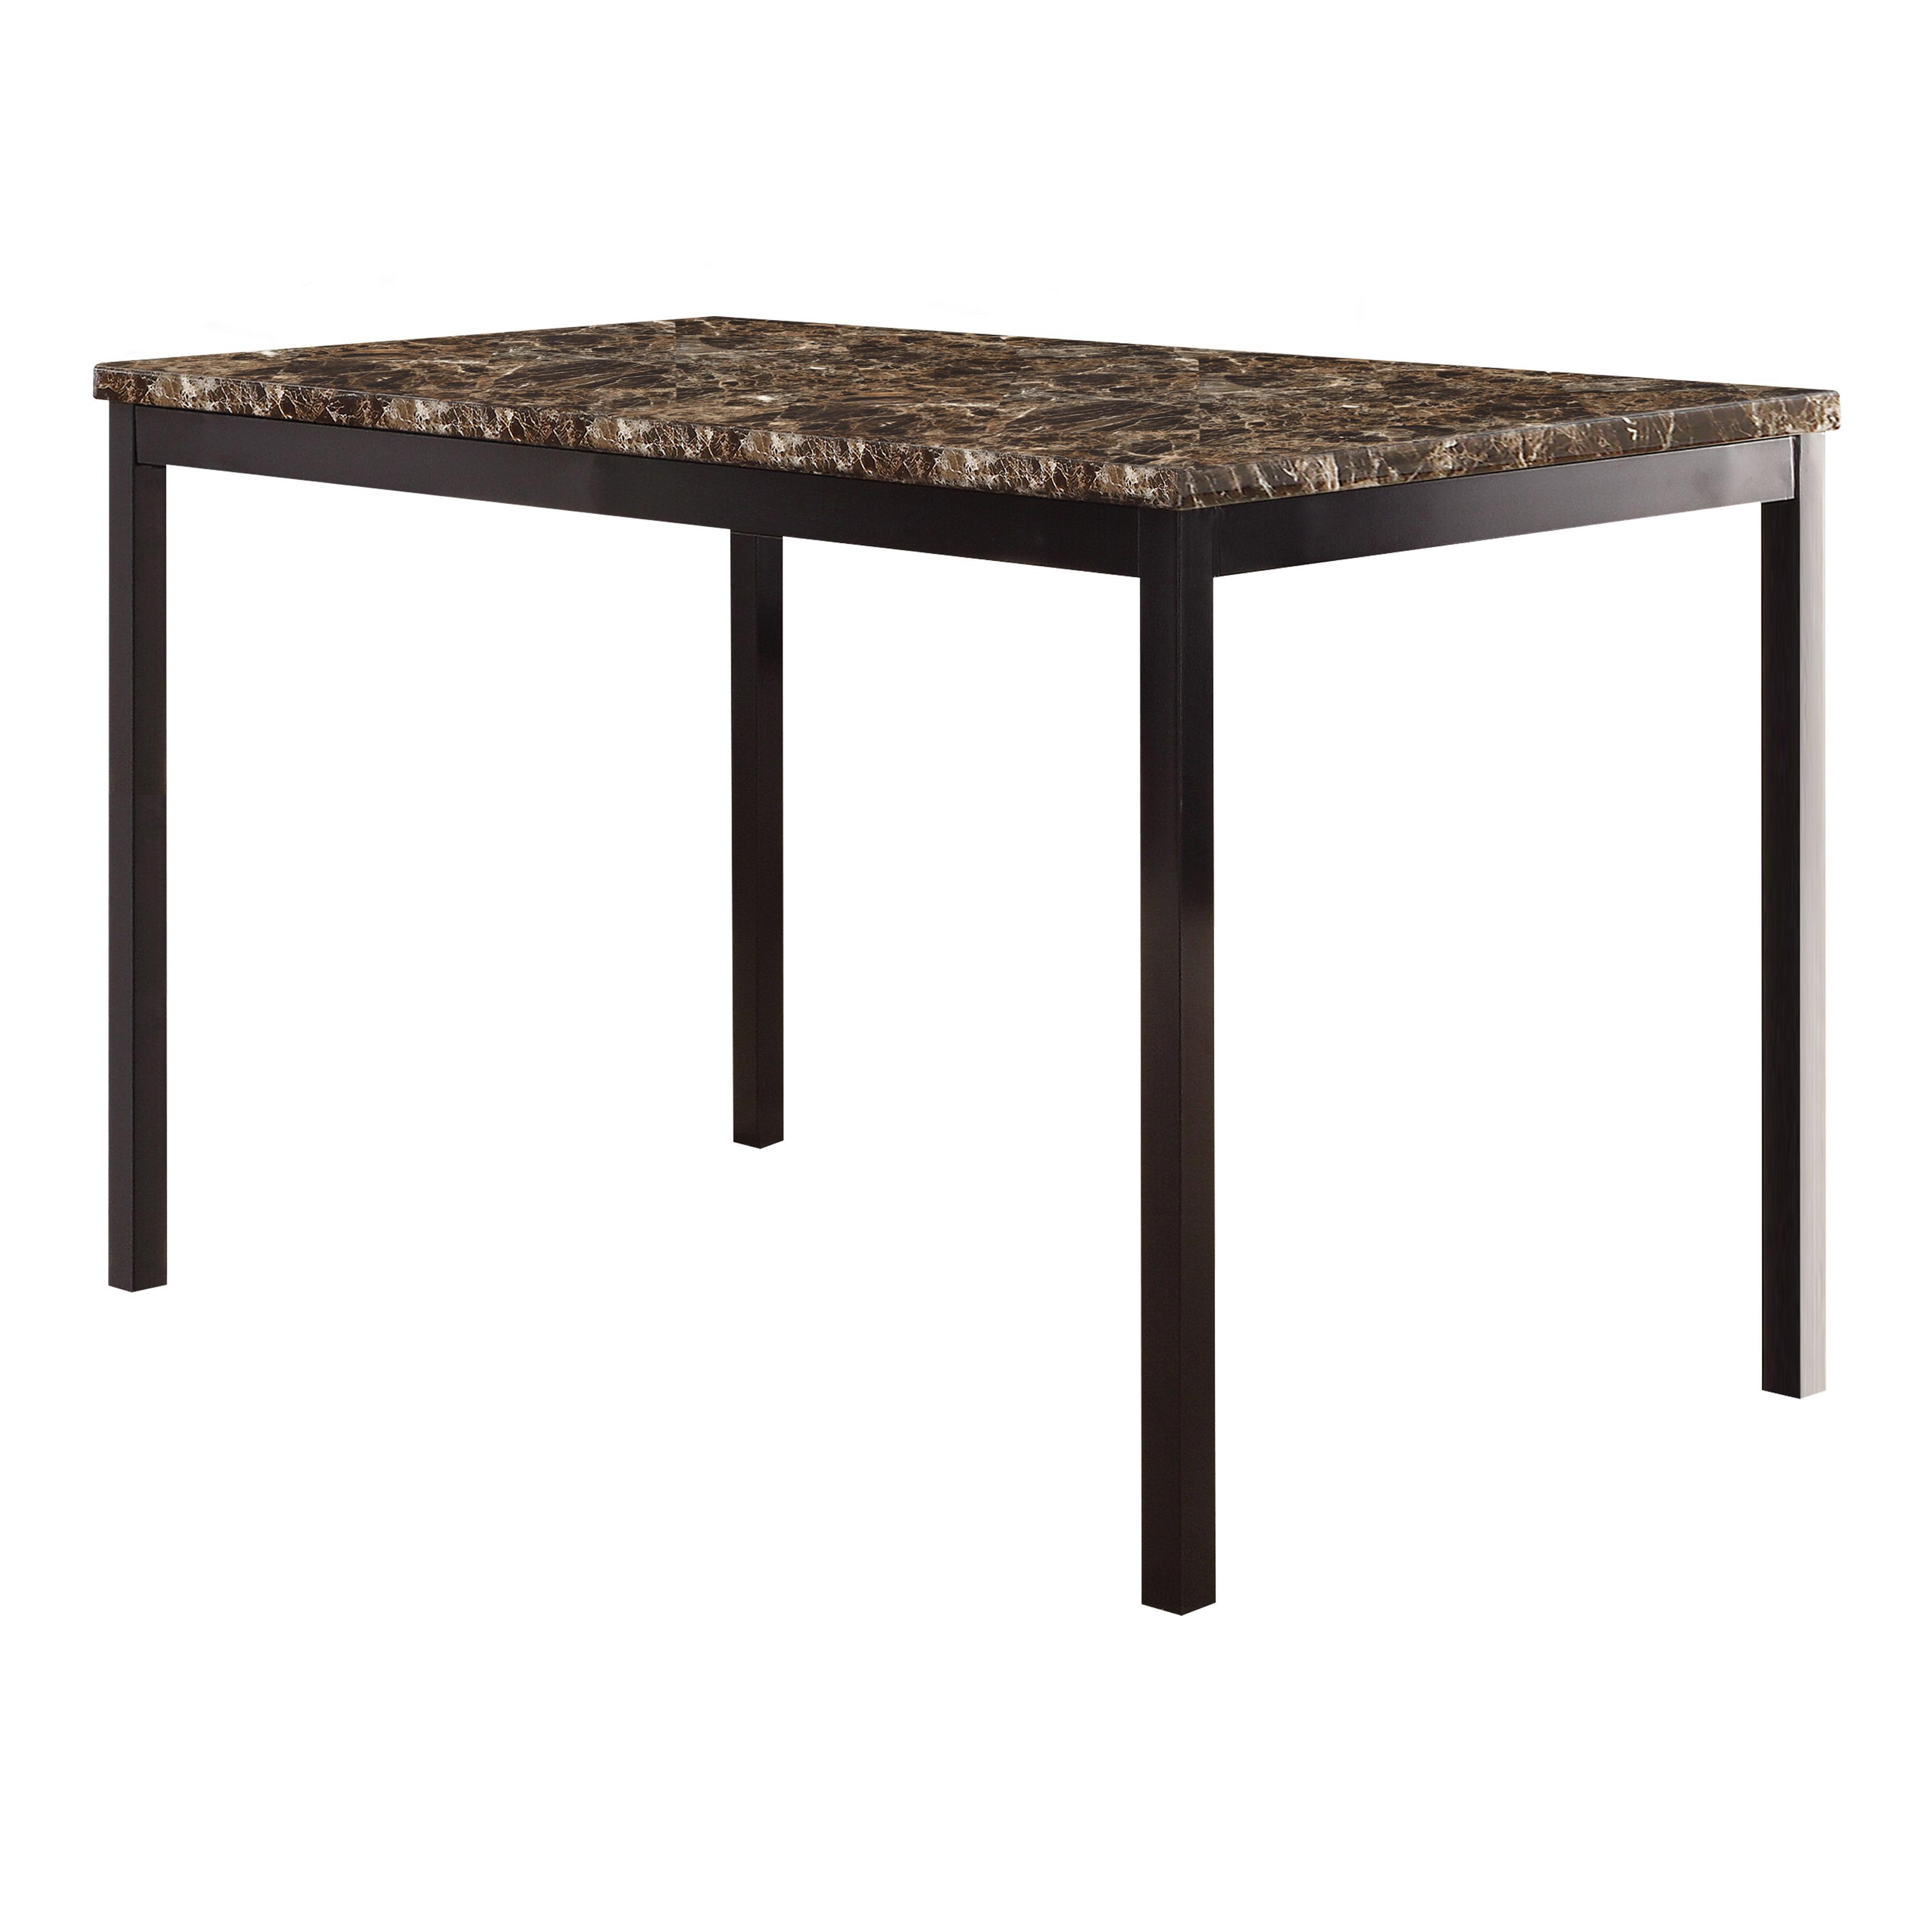 Homelegance 2601-48 Tempe Dining Table